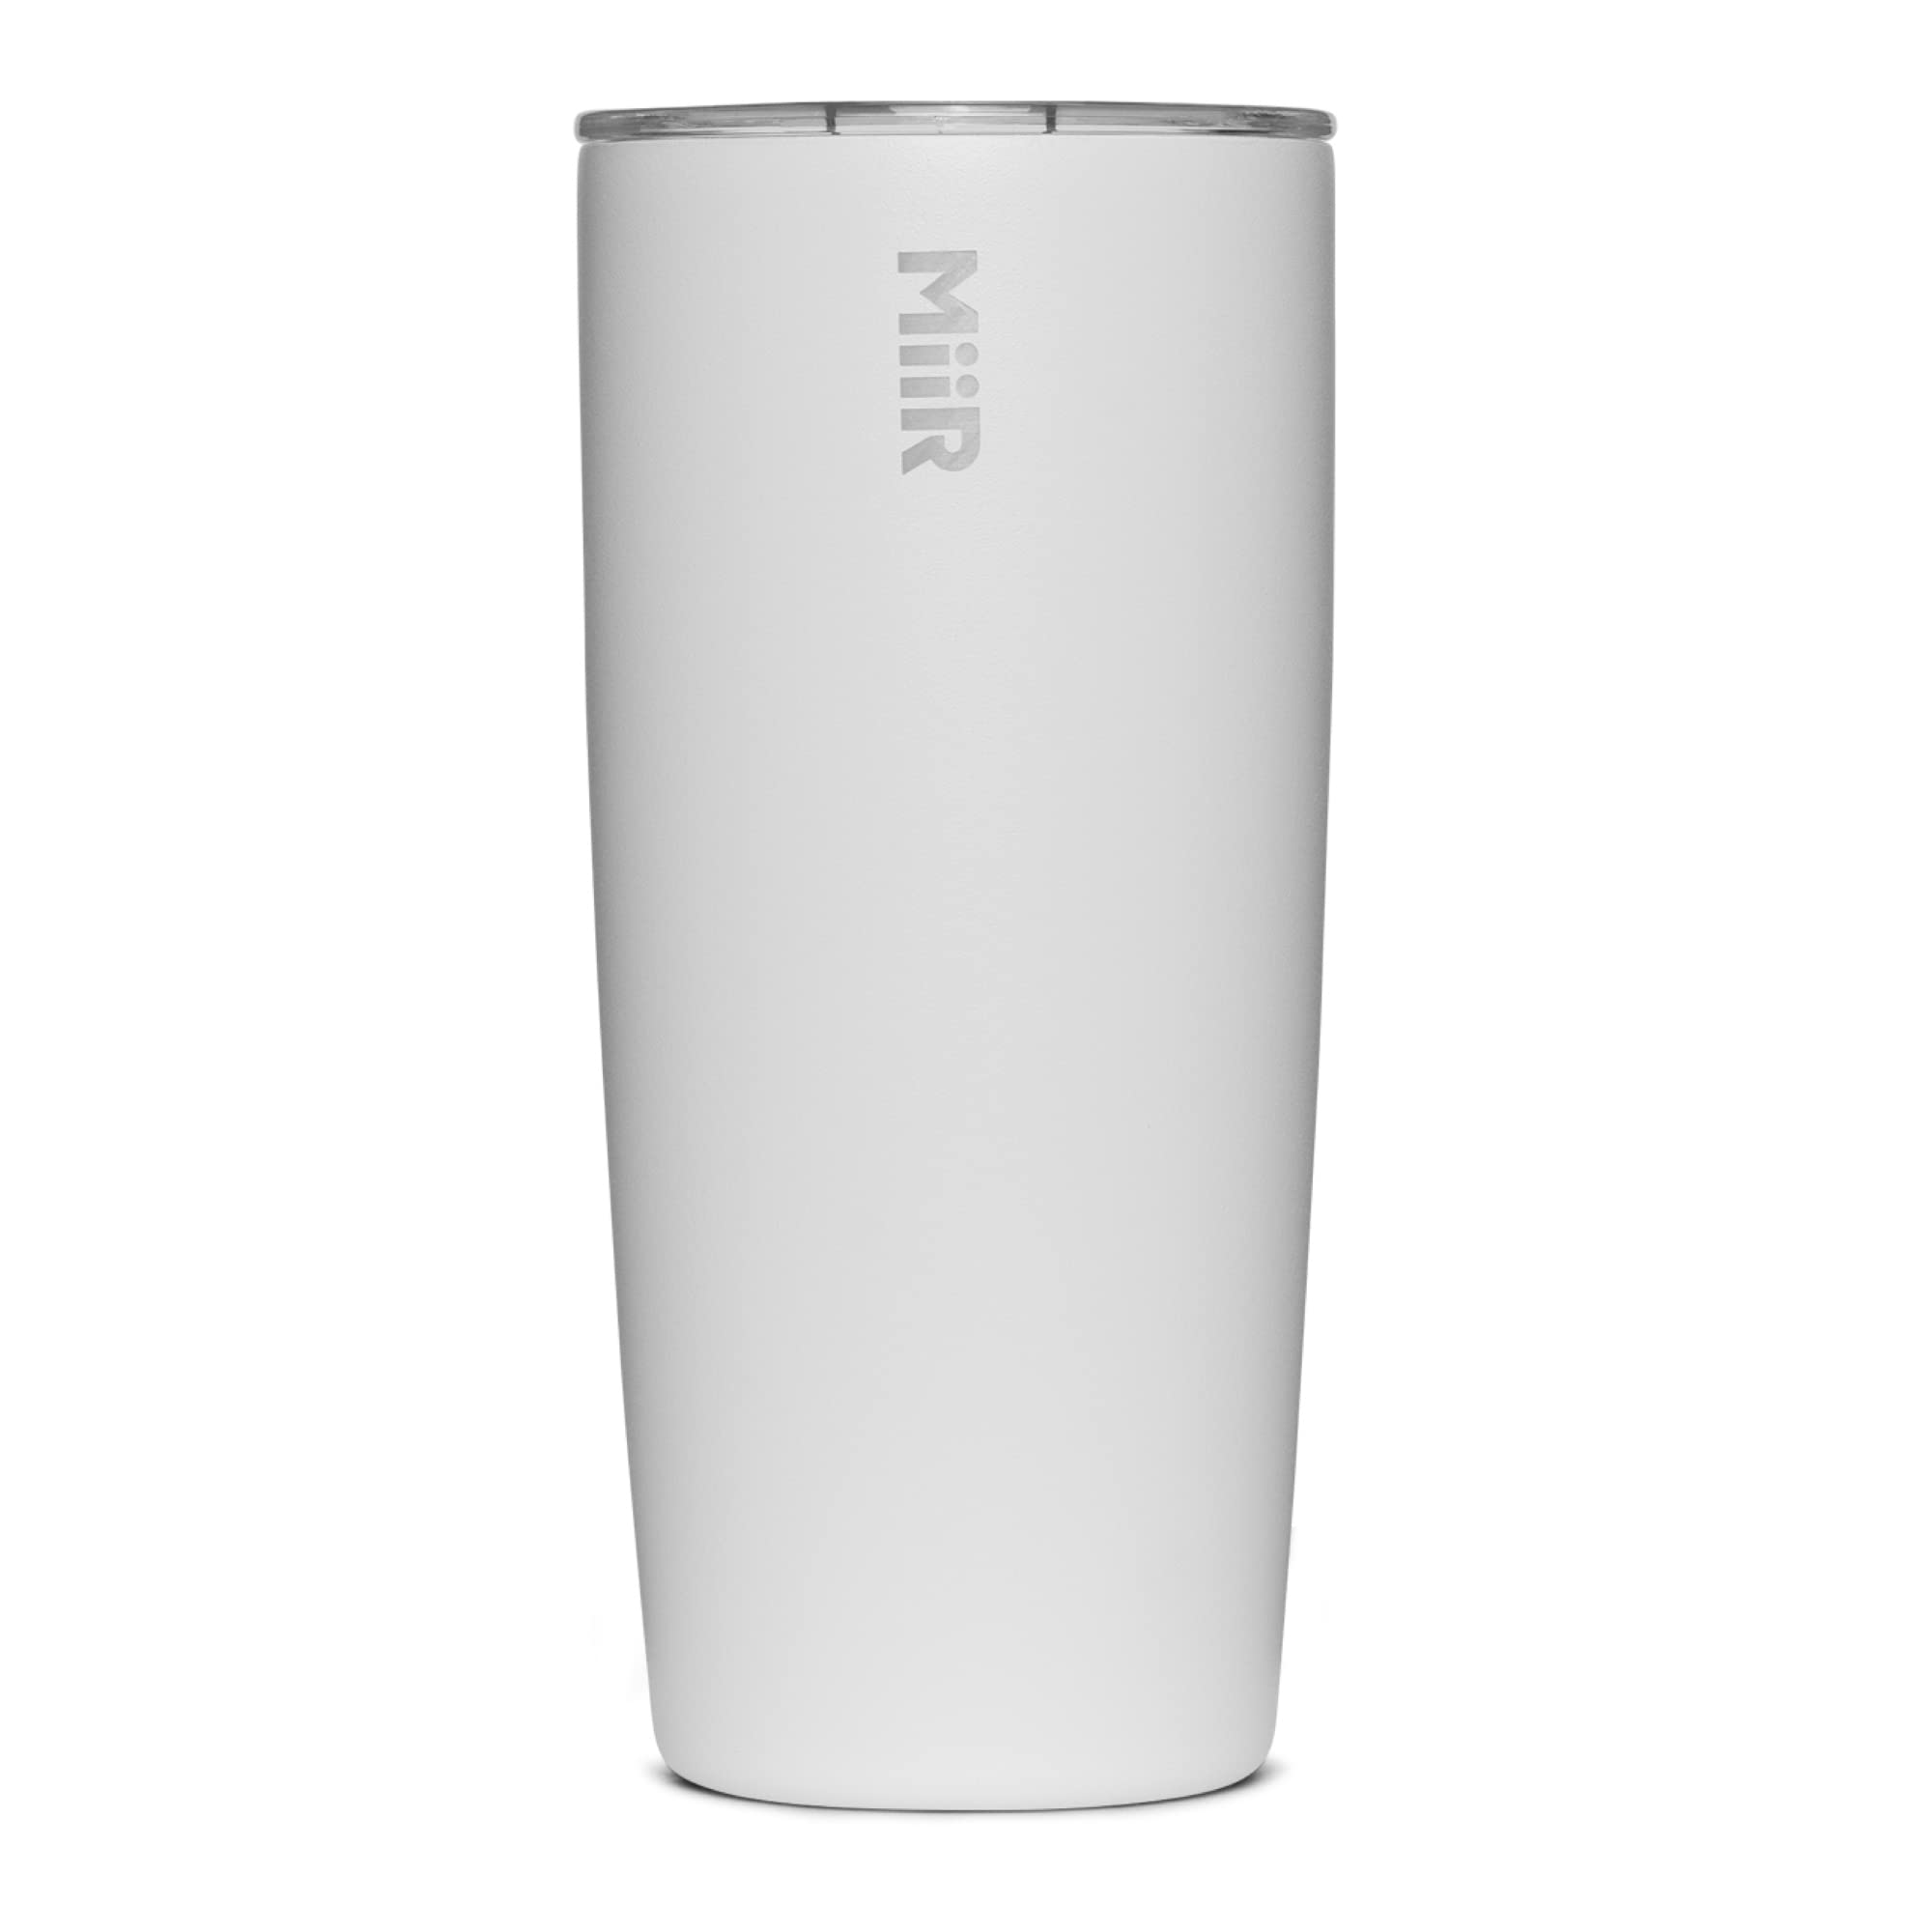 Miir, Tumbler, Vacuum Insulated, Stainless Steel With Slide Lid, Cup Holder Compatible & Bpa Free, White, 20 Fluid Ounces